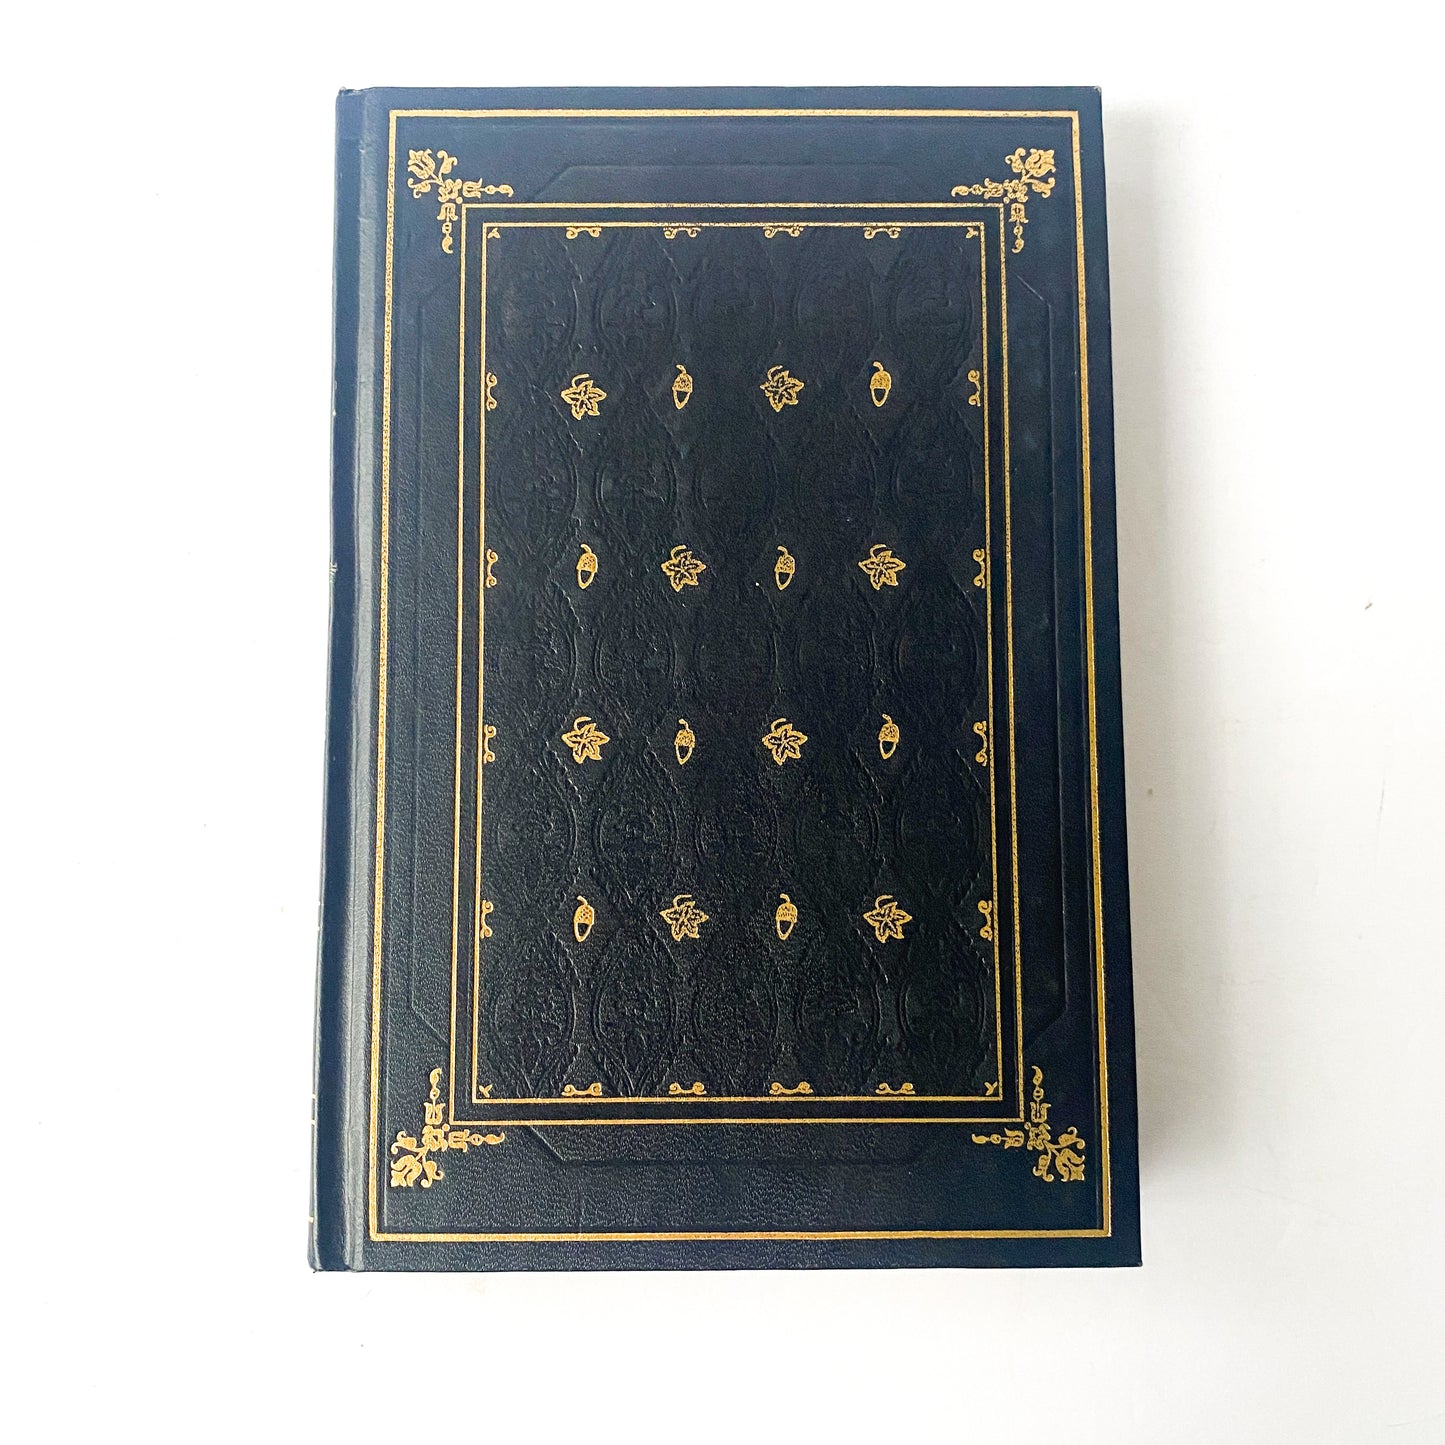 The House of the Seven Gables by Nathaniel Hawthorne, Vintage International Collectors Library Edition